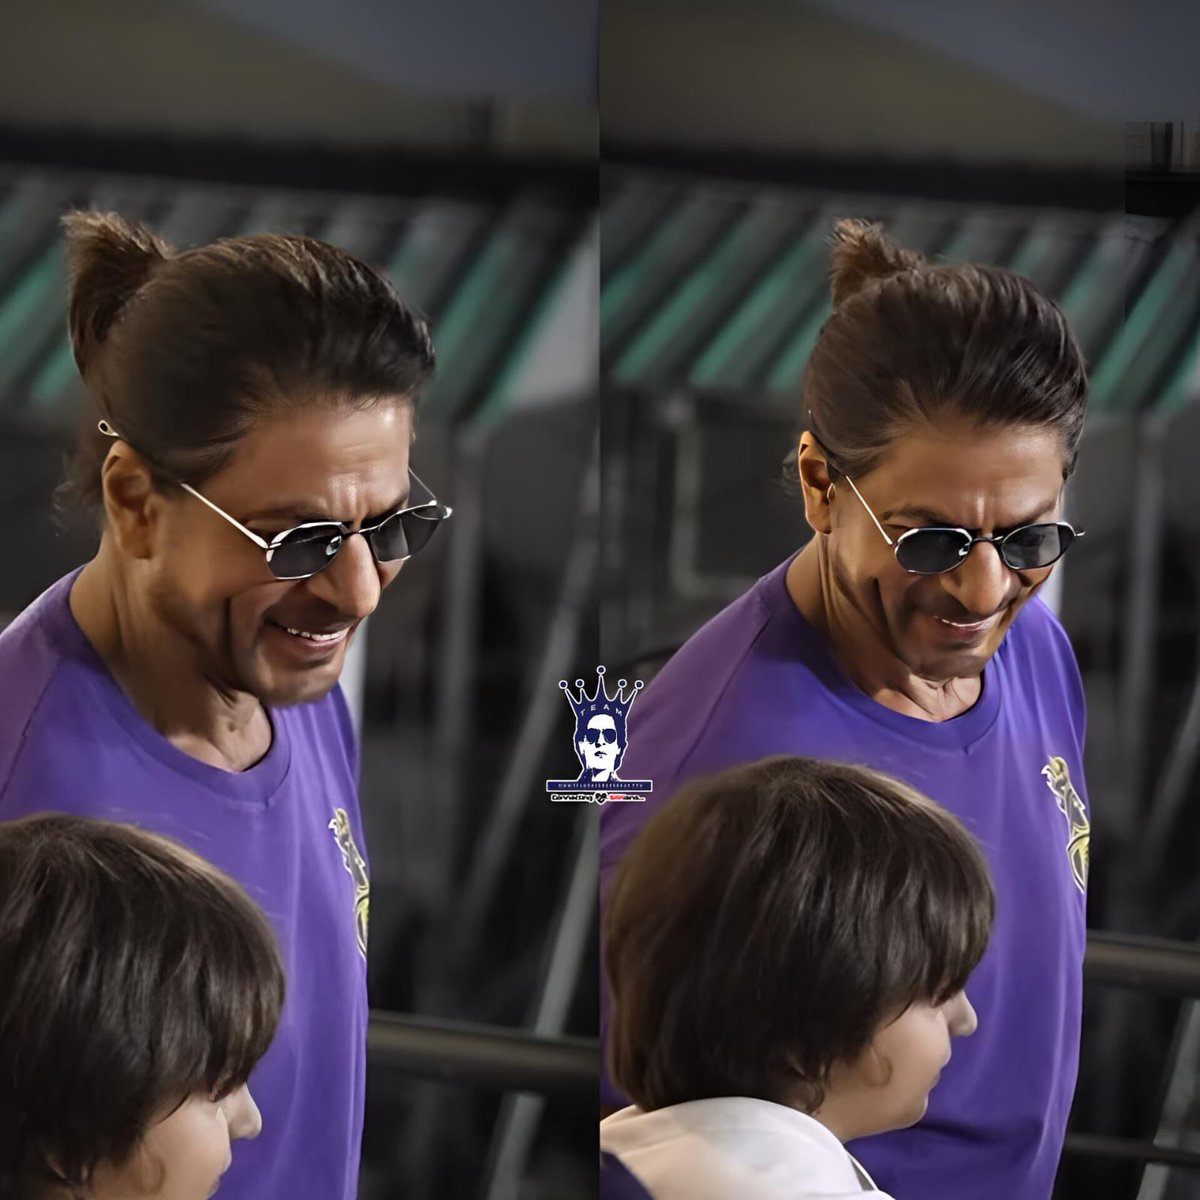 We want these smiles back in the stands SOON 💜🥰 #shahrukhkhan #AbRamKhan